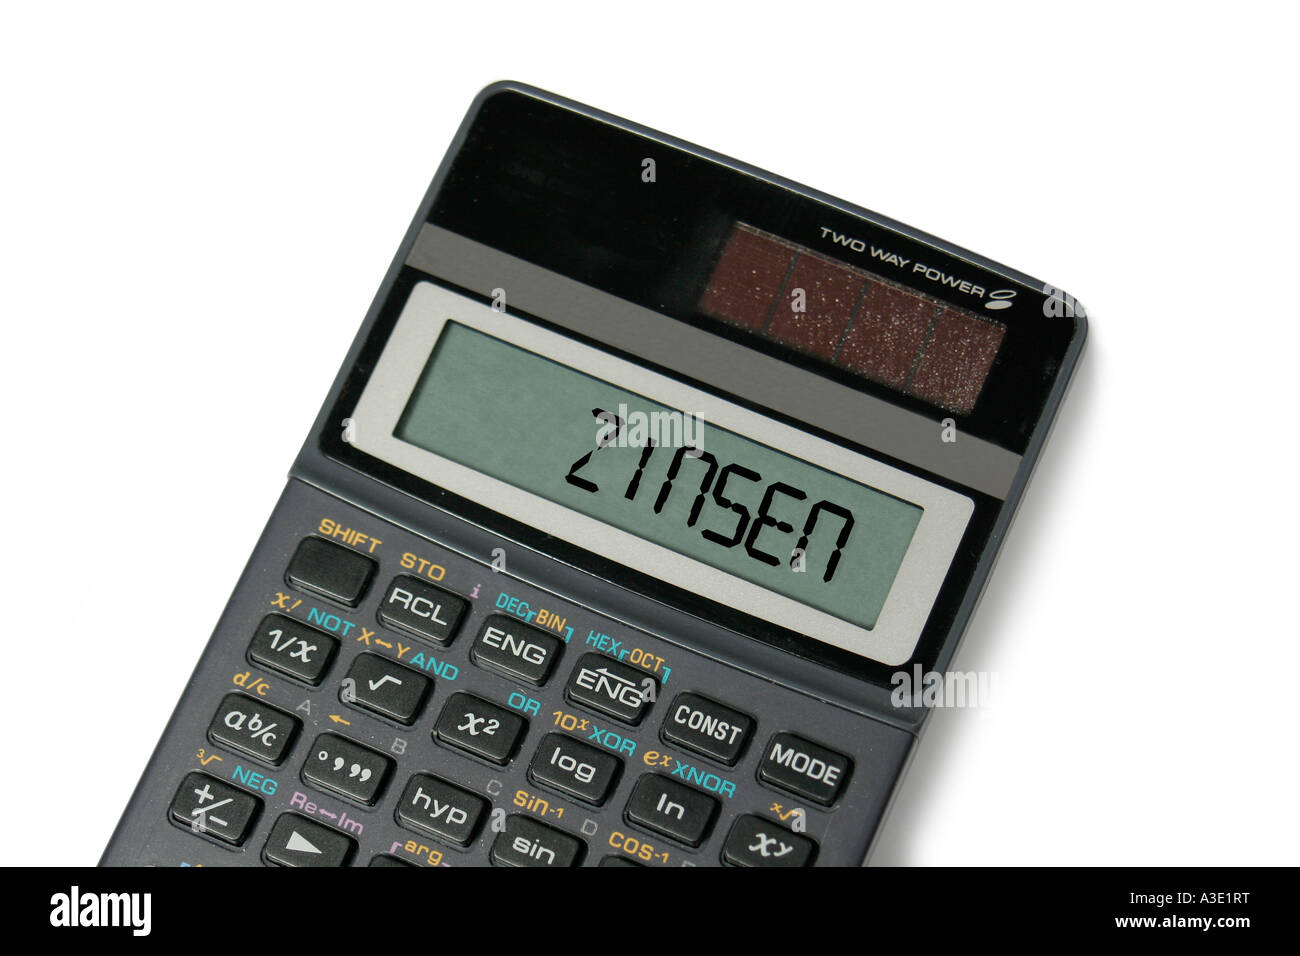 'Zinsen' written in the Display of a calculator Stock Photo